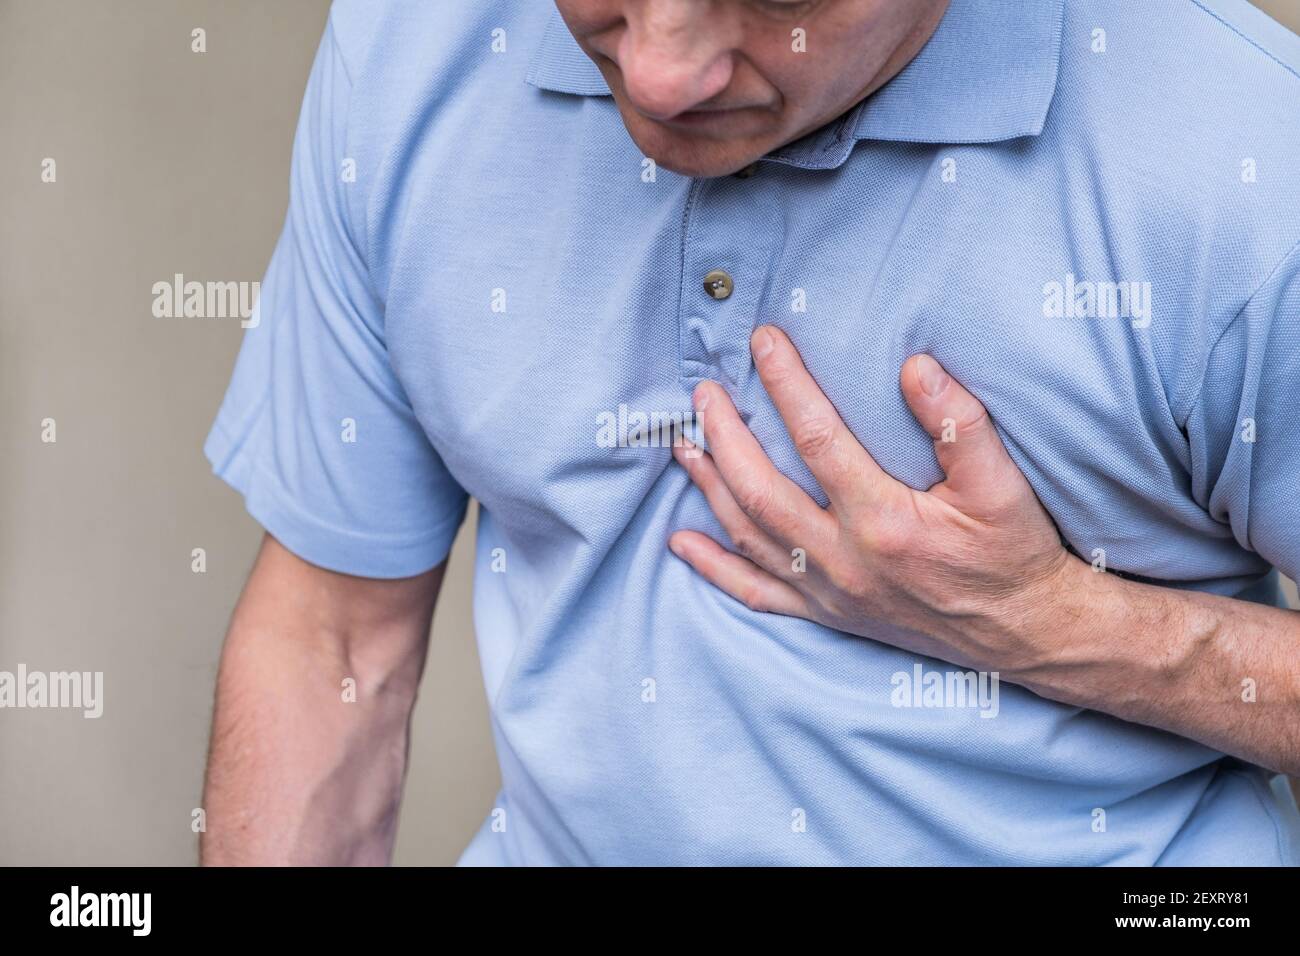 Heart pain, a person grabbing the heart area with his hand, suffering from chest pain, having a heart attack or painful cramps, pressing on the chest Stock Photo